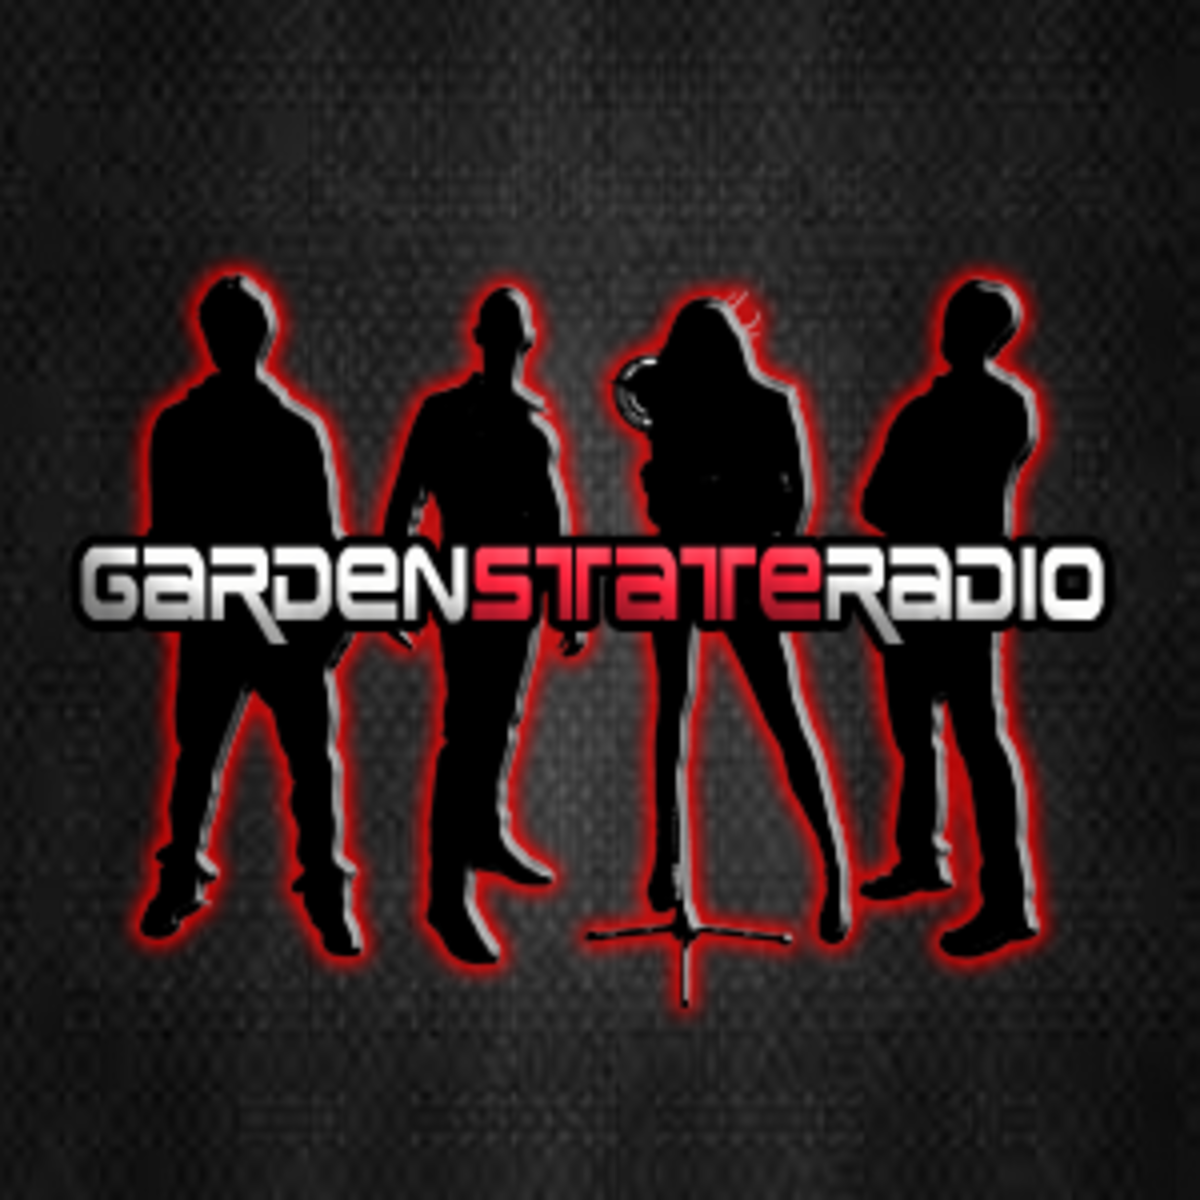 Garden State Radio Cover Band Central S Spotlight Of The Week